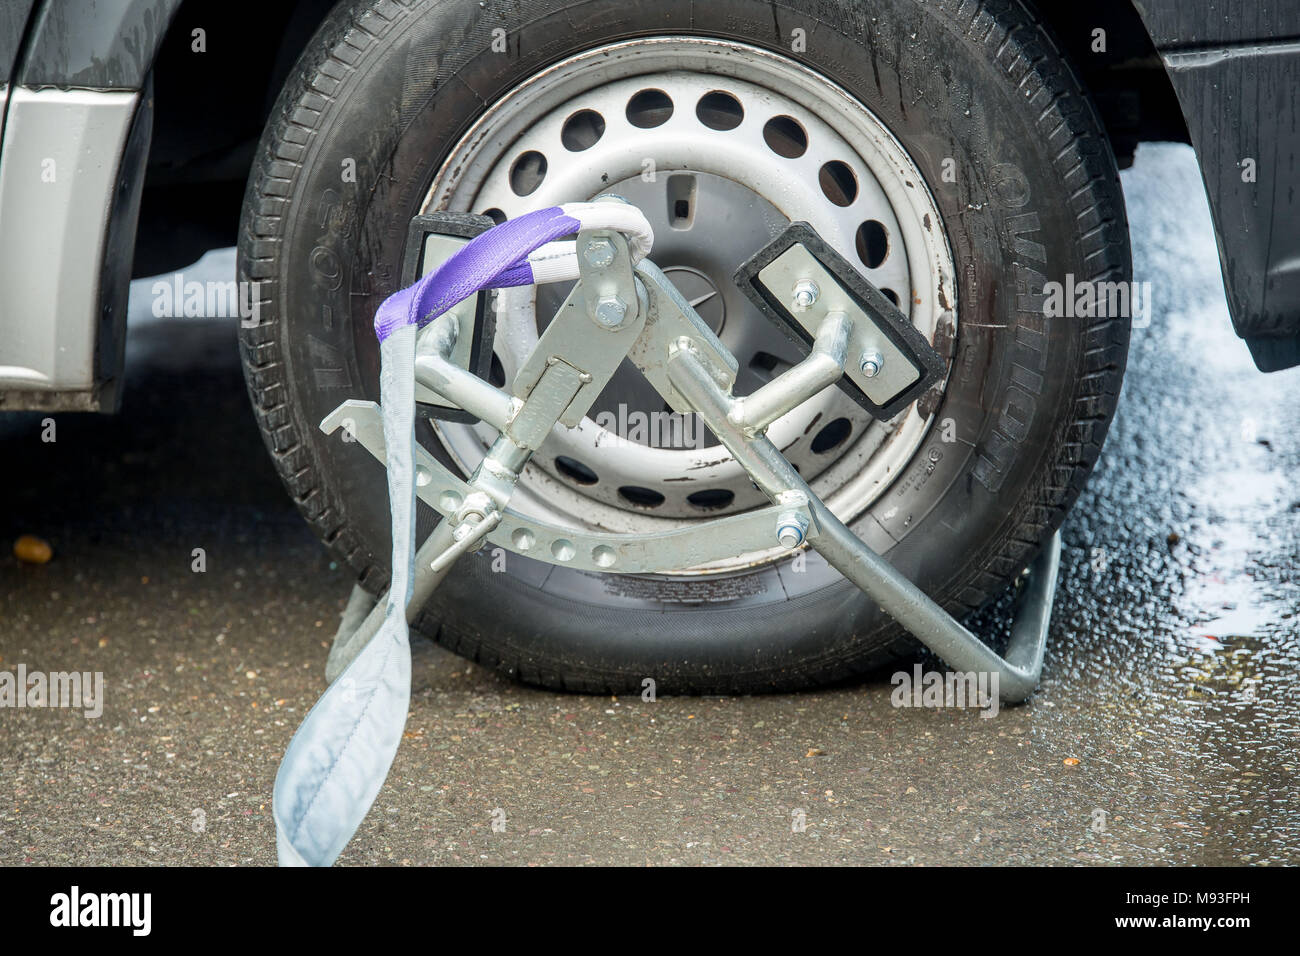 Wheel clamping of untaxed vehicles is becoming more common with the paper tax disc display being abolished and car tax needing to be paid online. Stock Photo